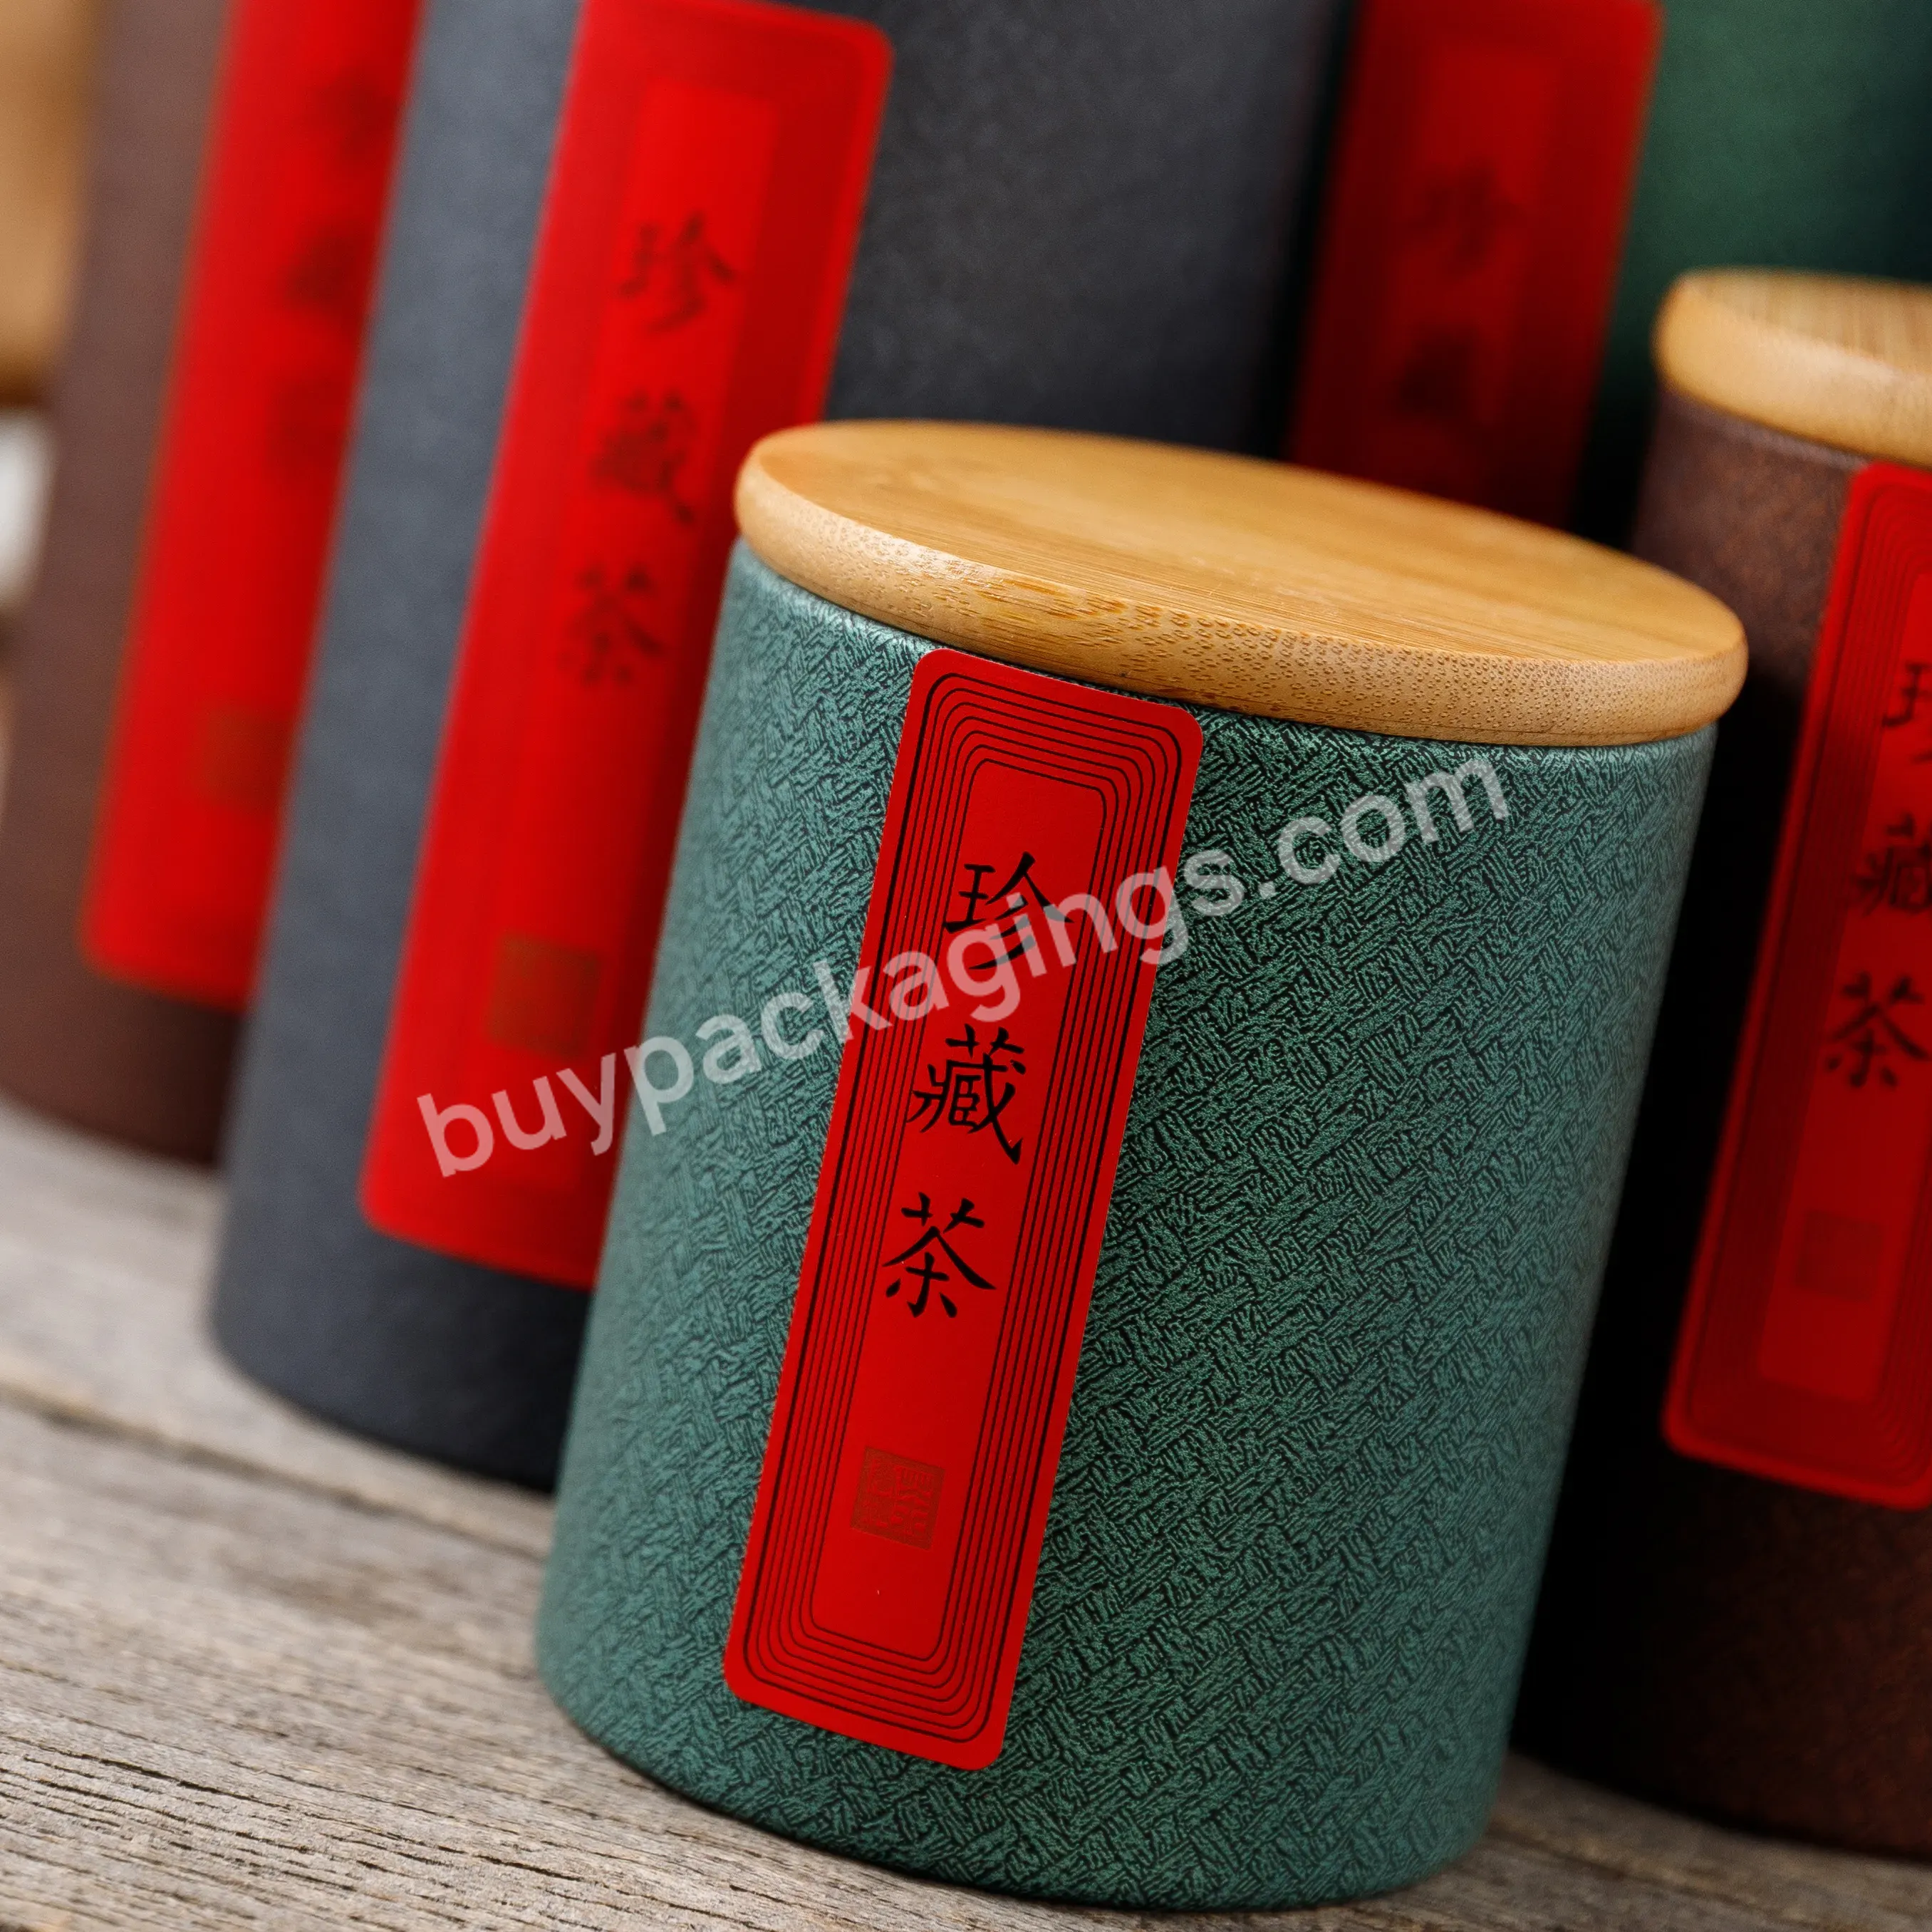 Tianyi Packing High Quantity Custom Kraft Data Round Paper Cans Packaging Tea Caddy Paper Tube Packaging Paper Tube - Buy Paper Cans Packaging,Round Double Flat Buckle Tea Caddy,Paper Tube Packaging Paper Tube.